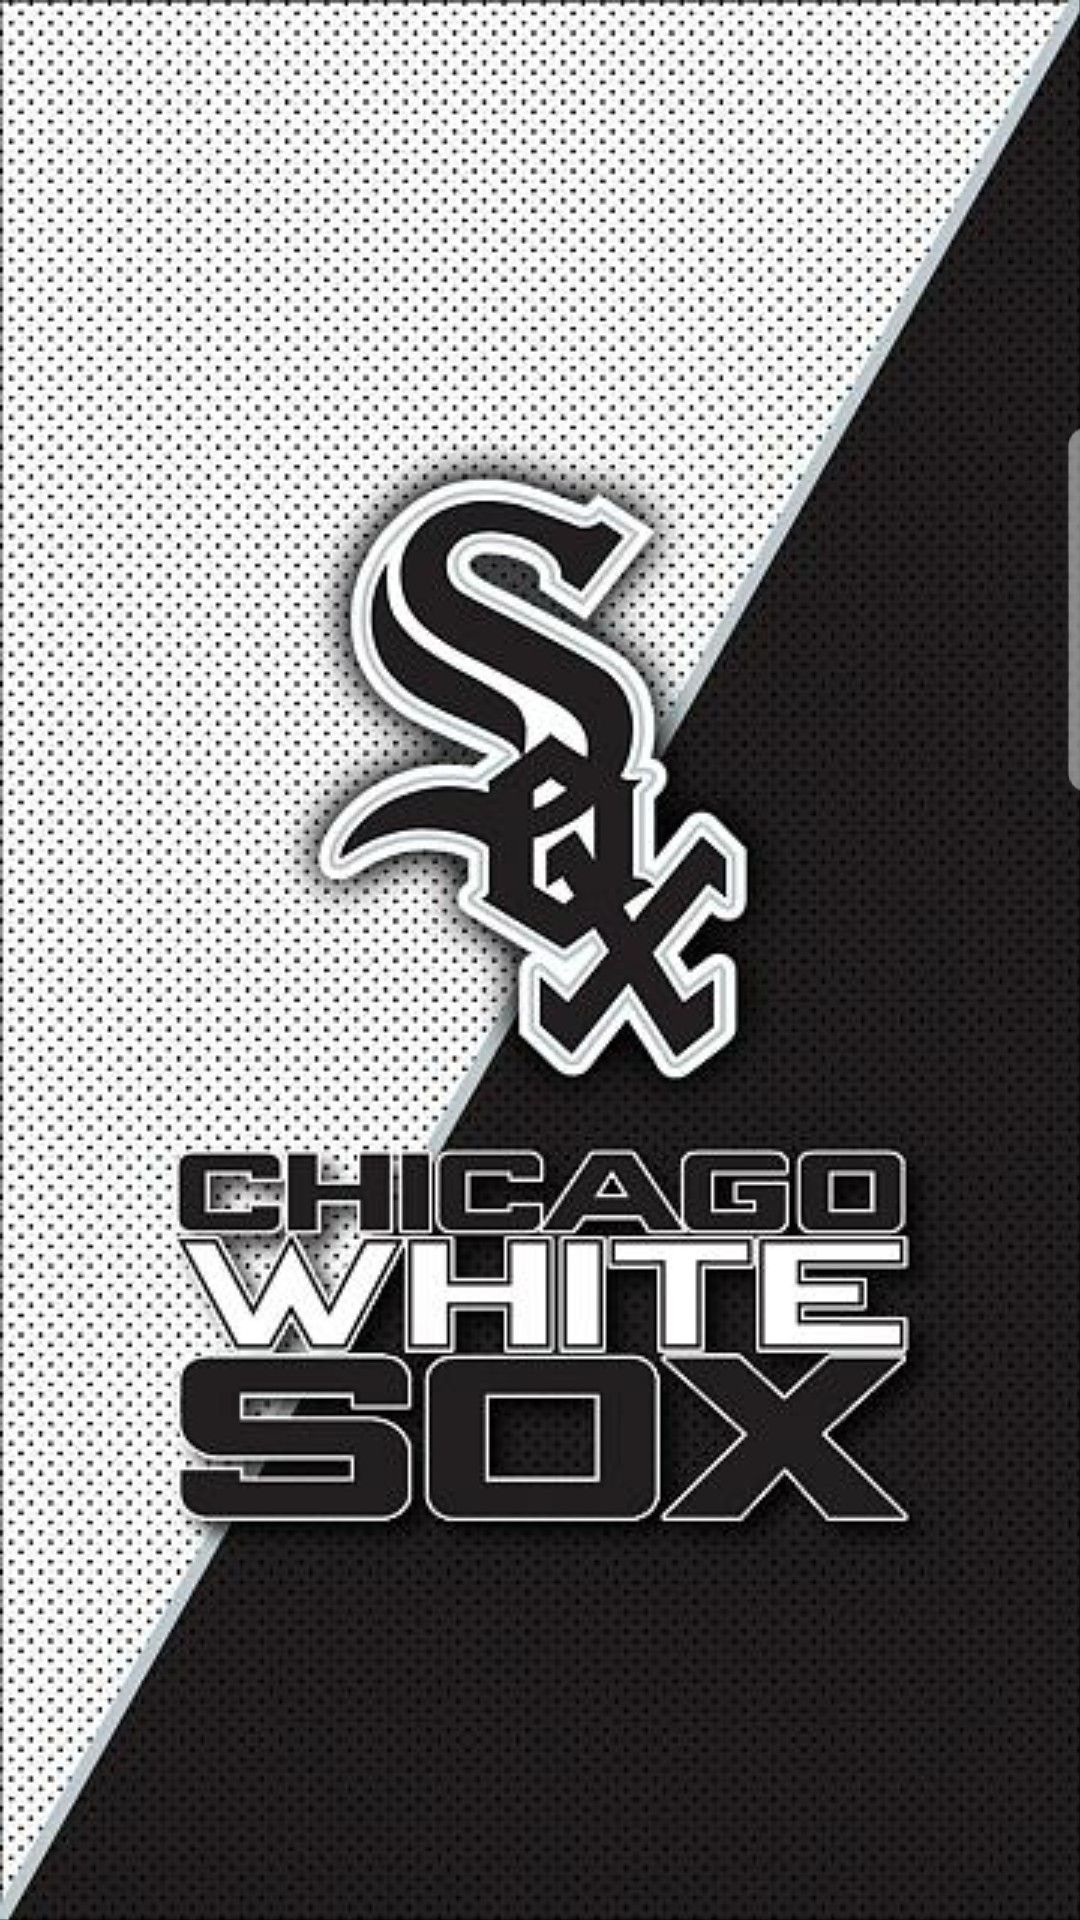 Chicago White Sox Wallpaper iPhone